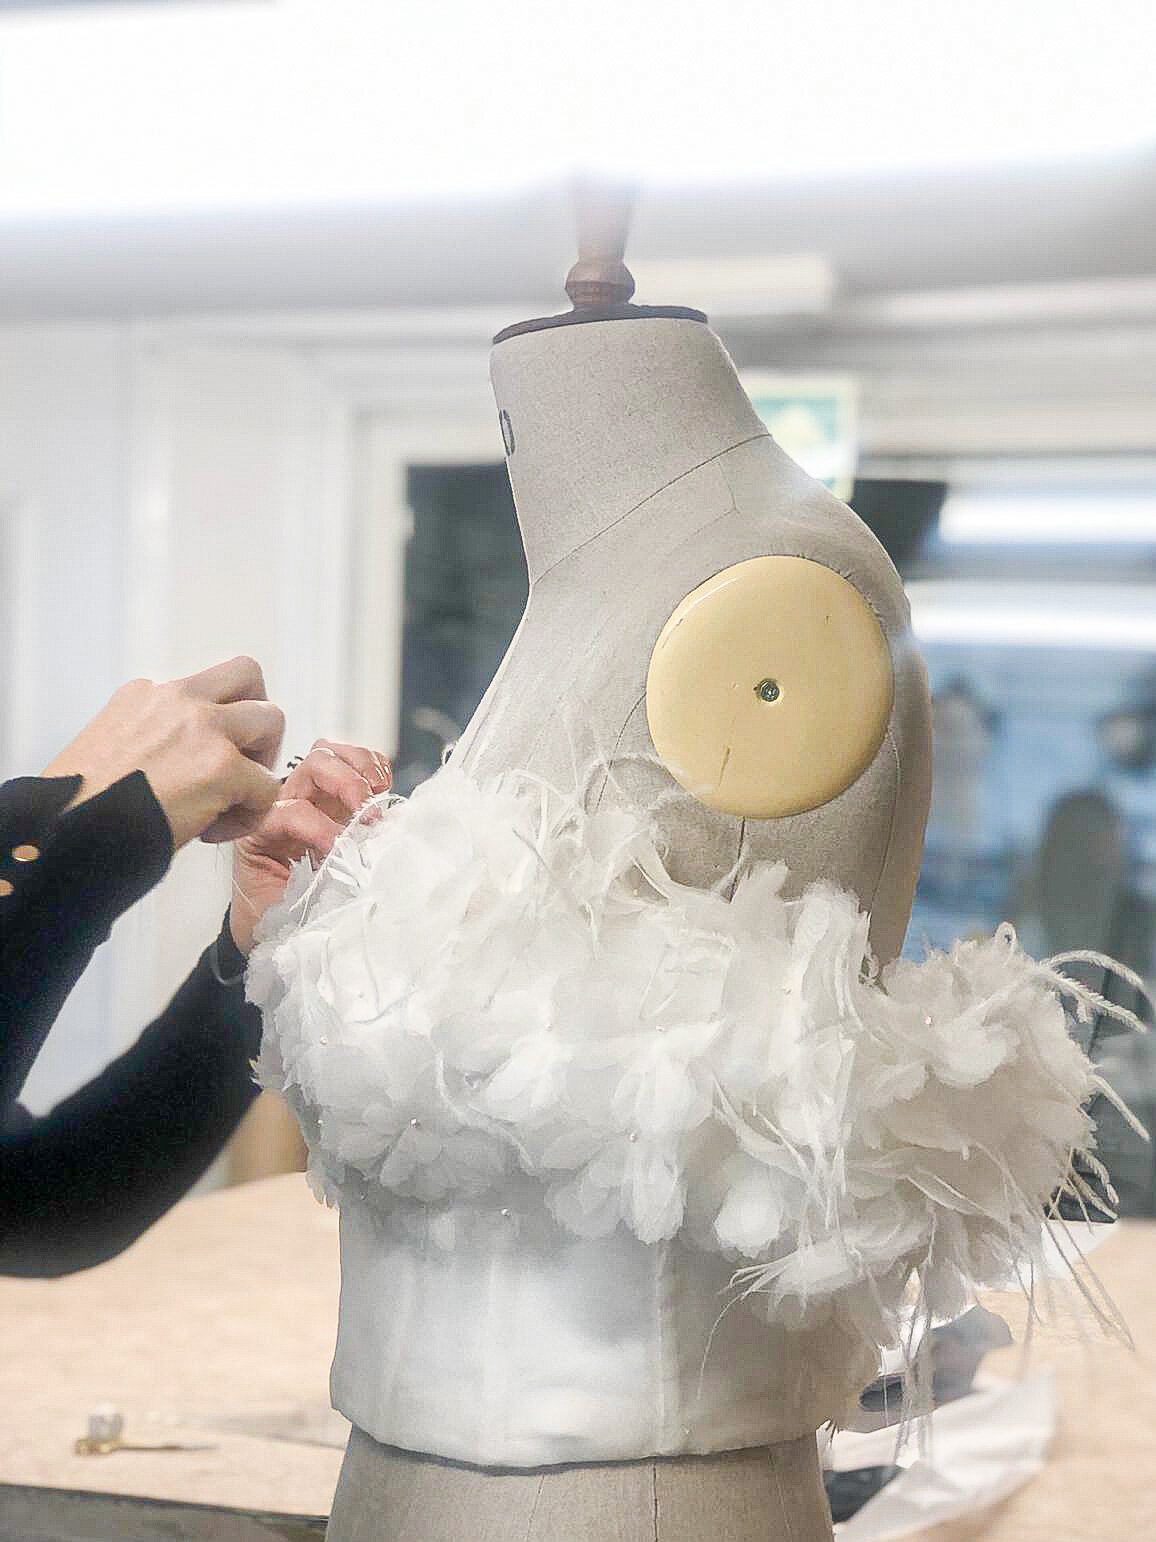 The making of Holly Willoughby's bespoke corset for Dancing on Ice | Behind the scenes at the Halfpenny London atelier